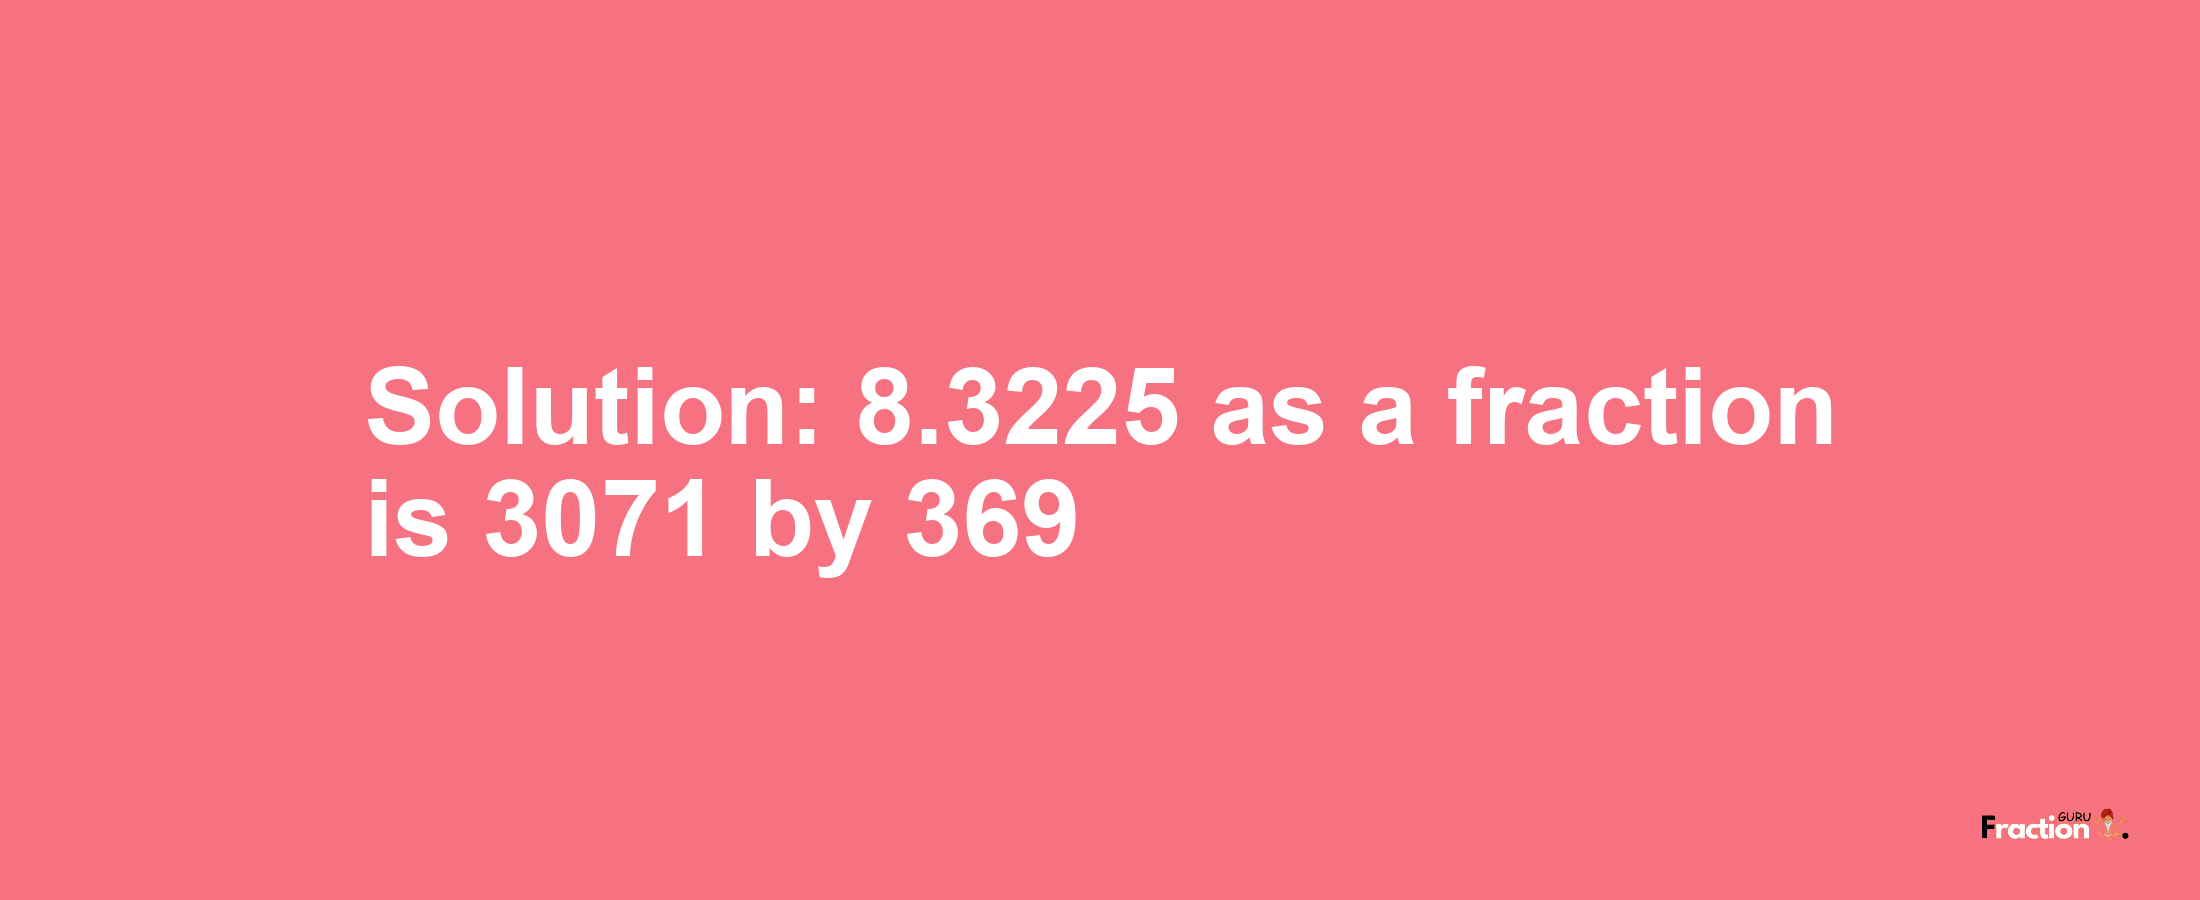 Solution:8.3225 as a fraction is 3071/369